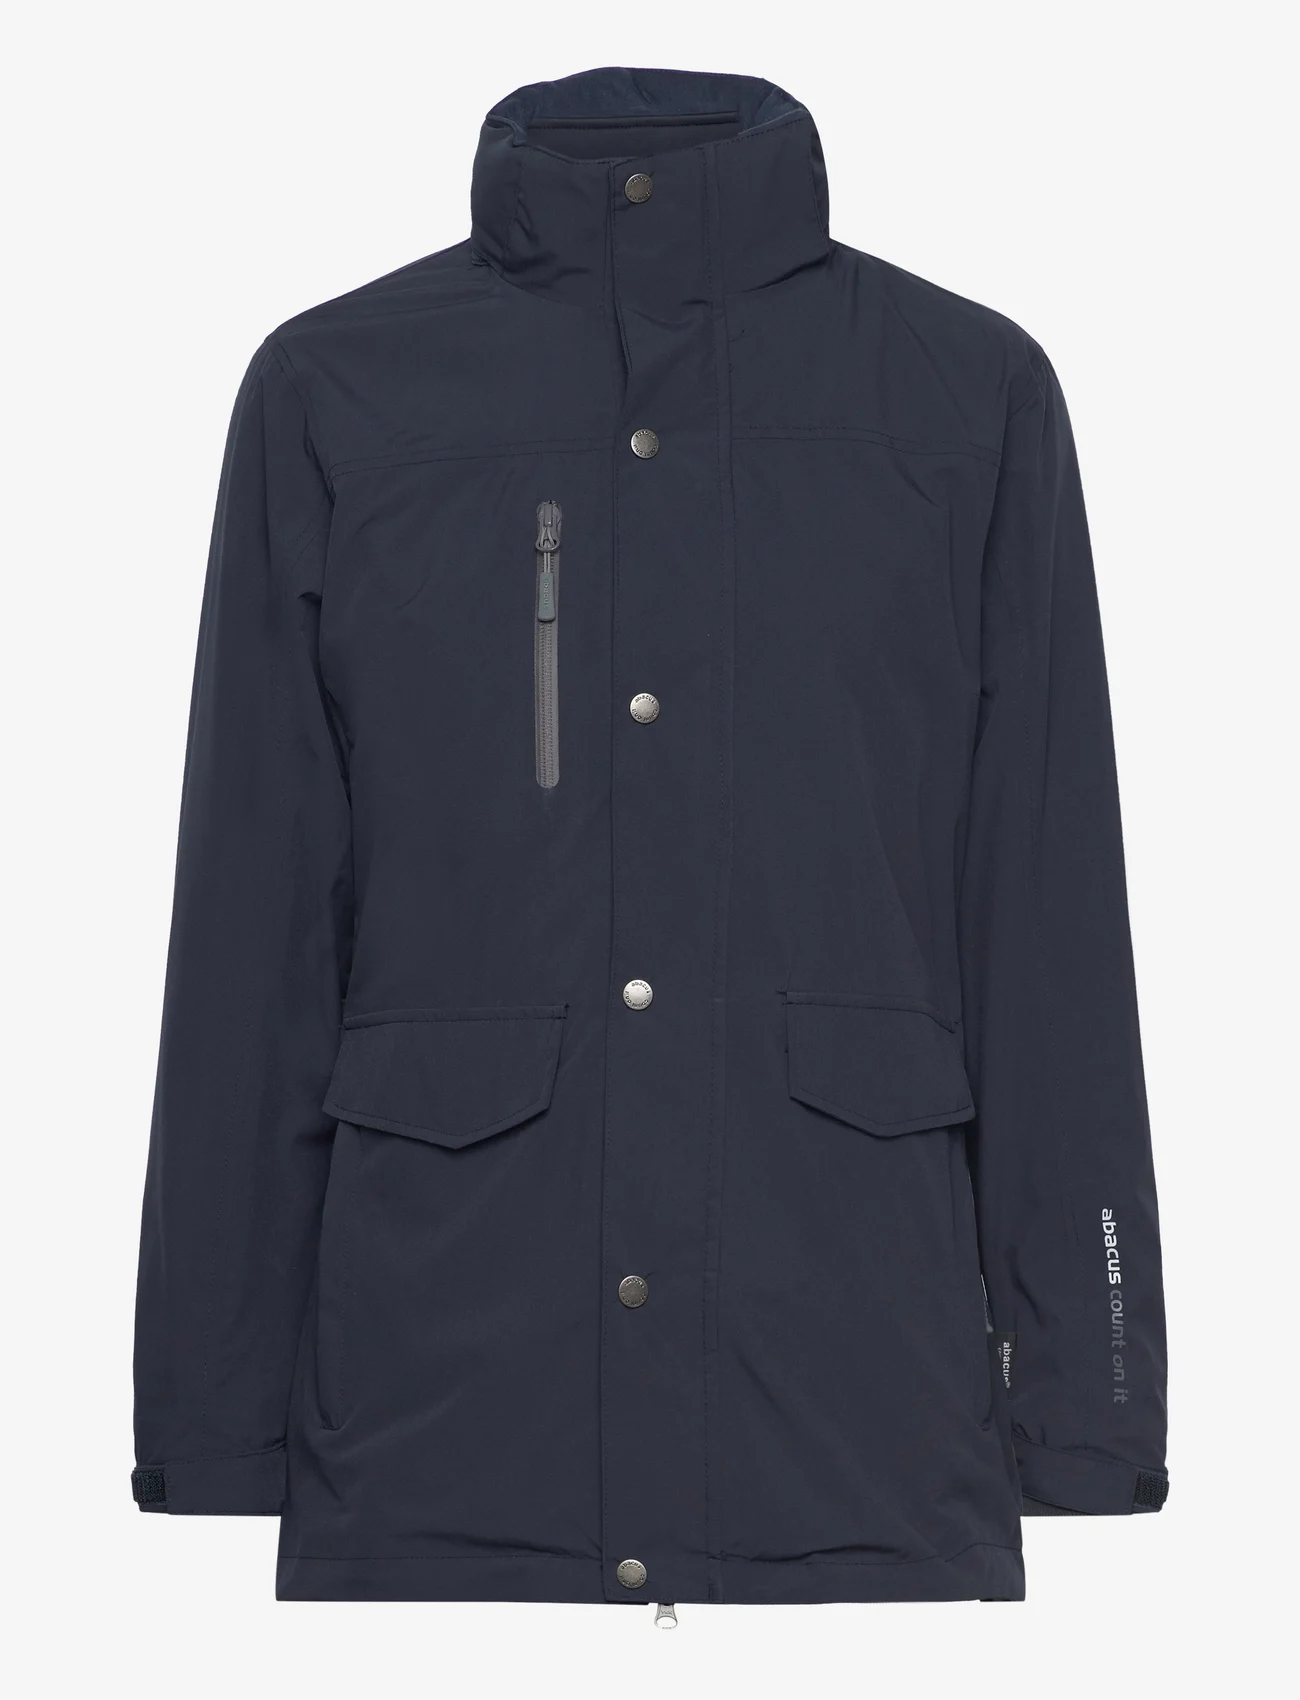 Abacus - Lds Staff 3 in1 jacket - parkatakit - navy - 0